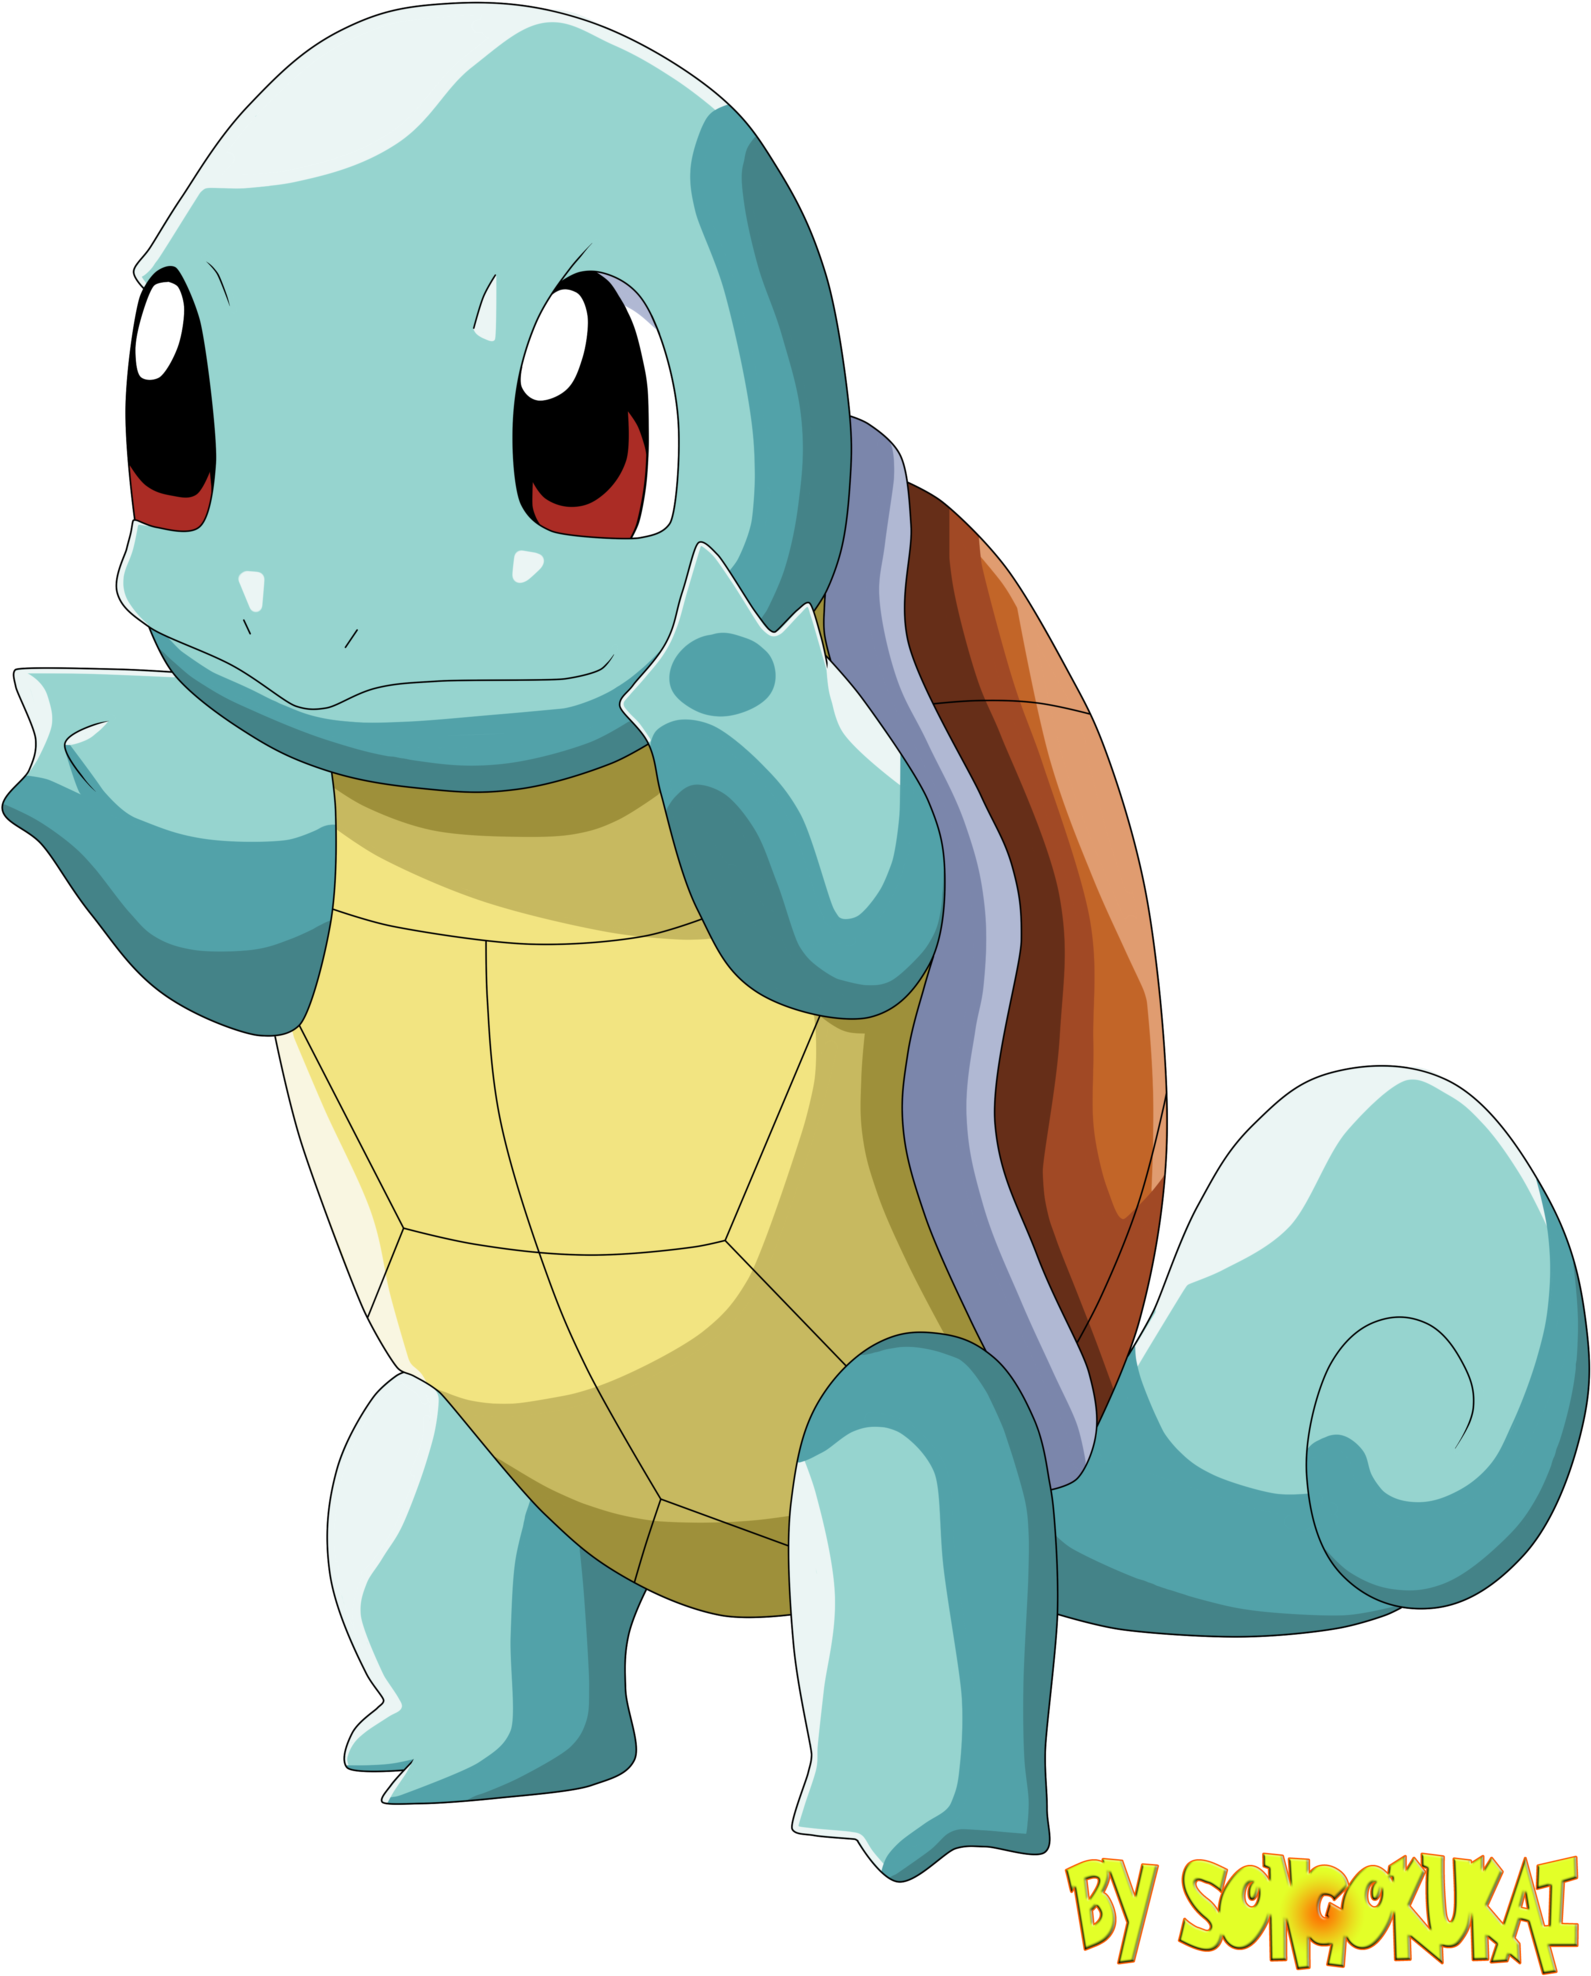 007 Squirtle 007 By Krizeii - Como Dibujar A Squirtle (1600x2105)